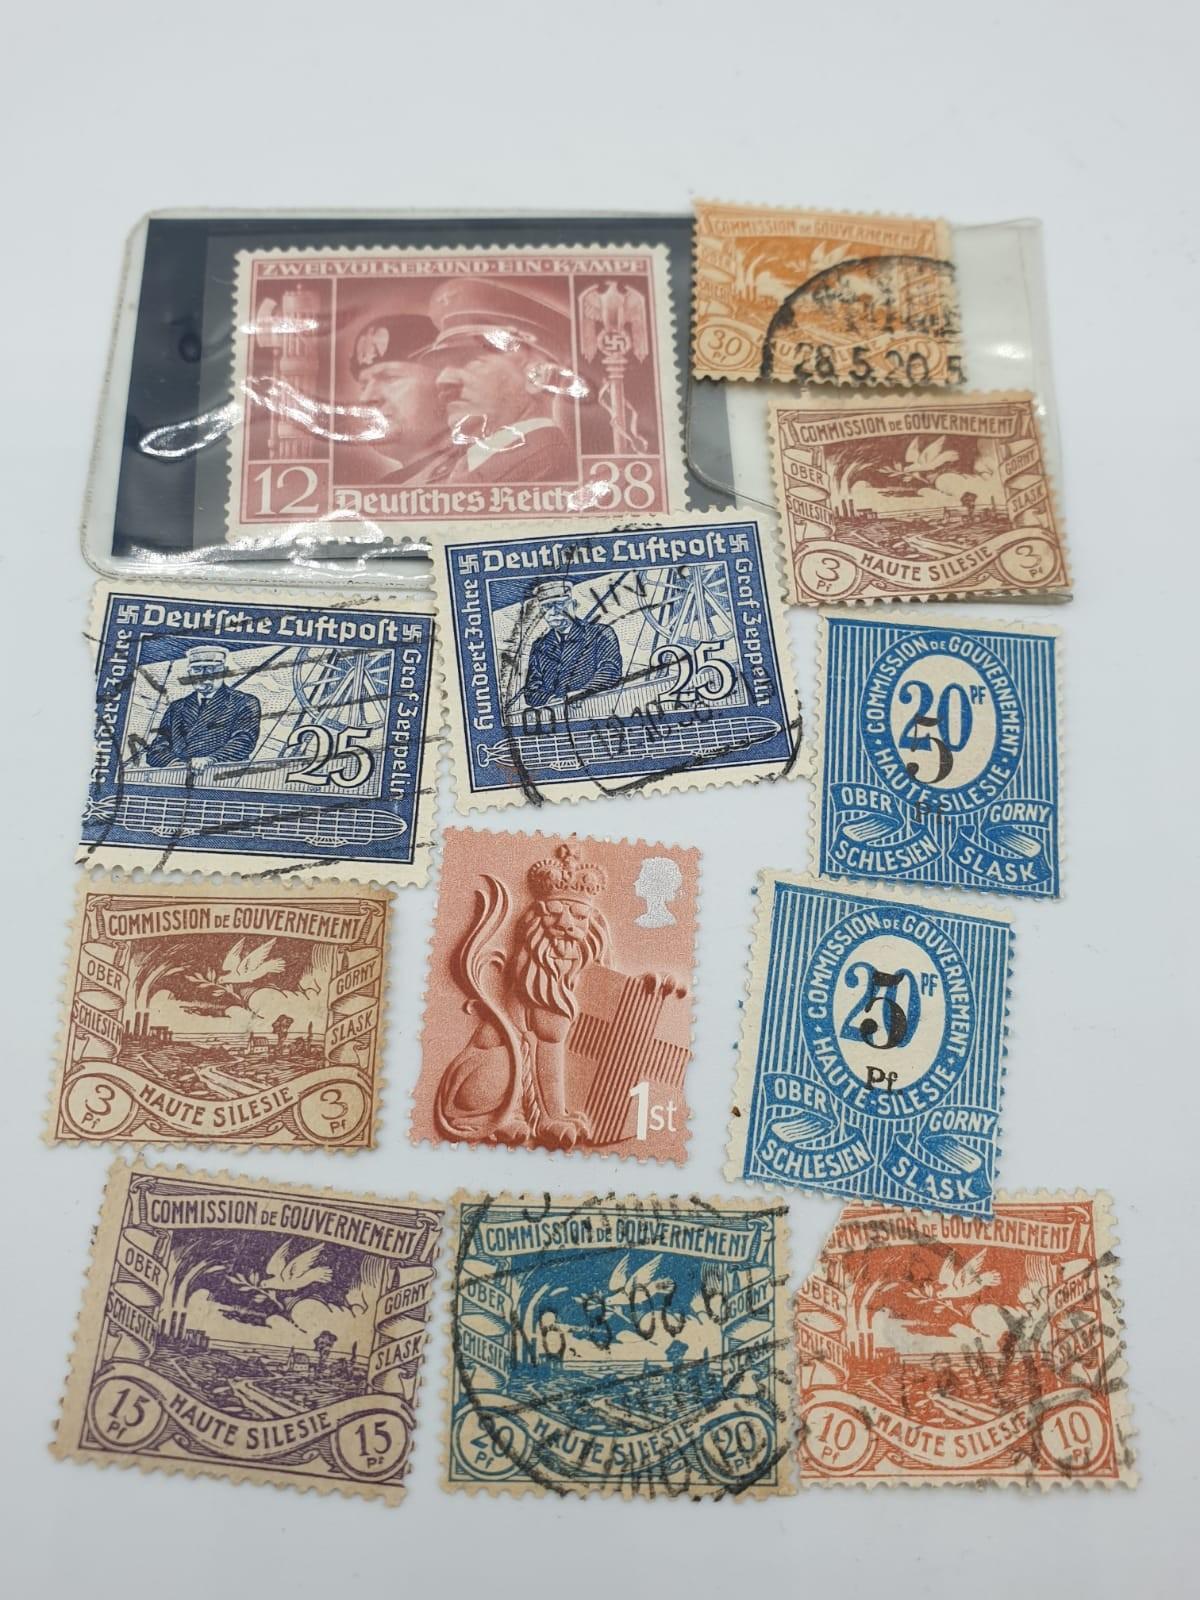 Assortment of 12 German postage stamps from 1930s to include unused Hitler mussolini stamp.